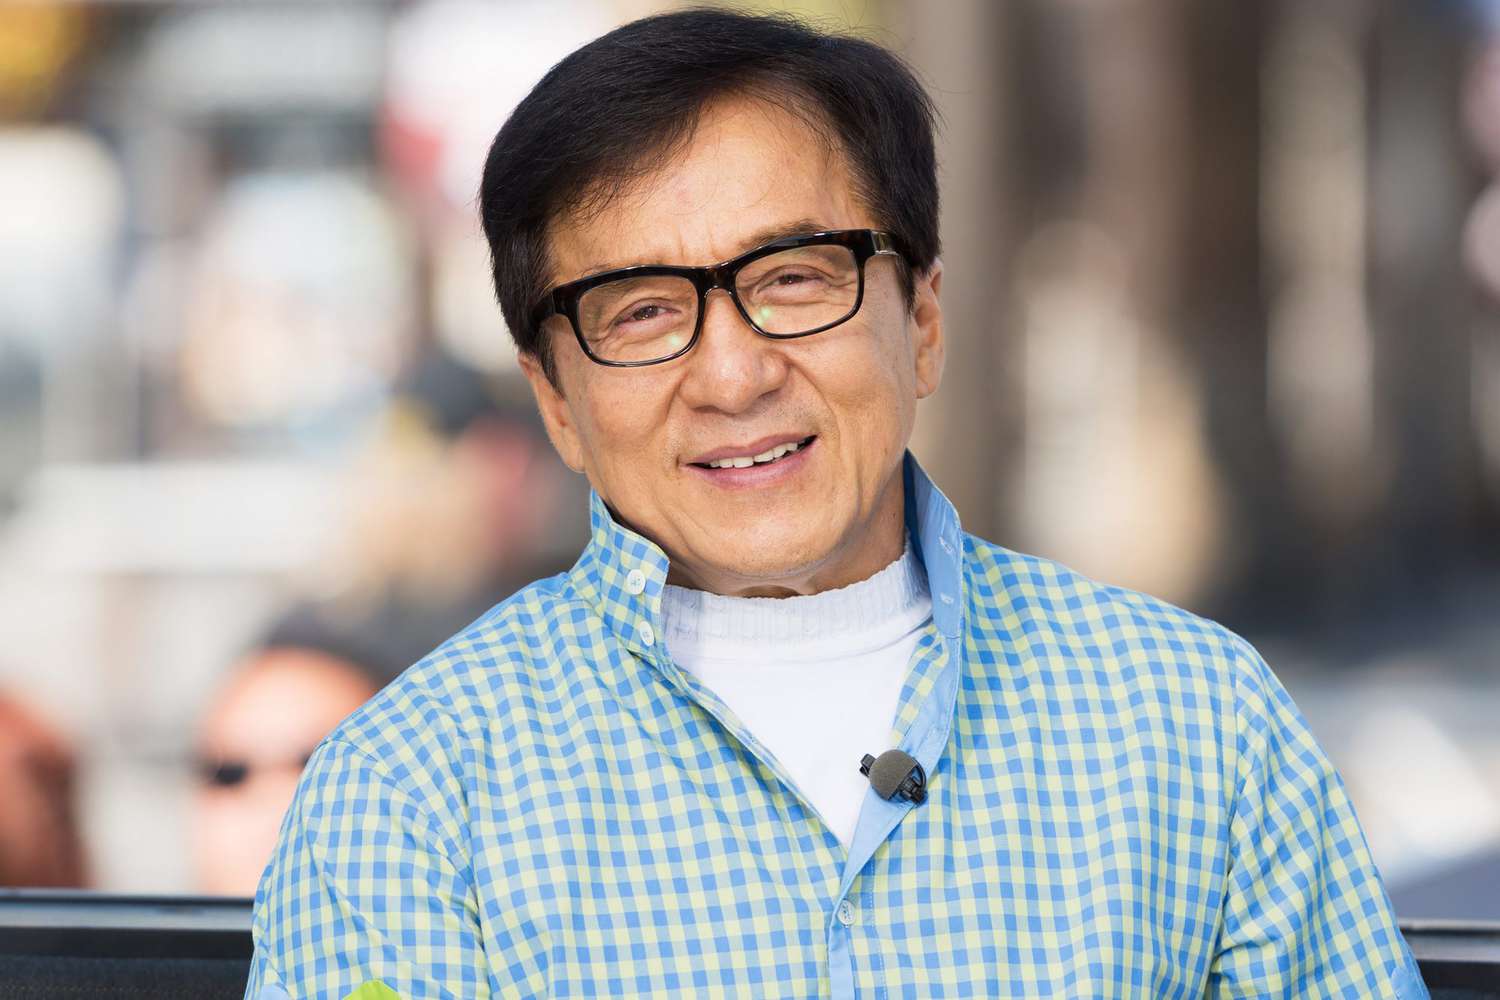 Jackie Chan Admits to Cheating on His Wife in Memoir | PEOPLE.com